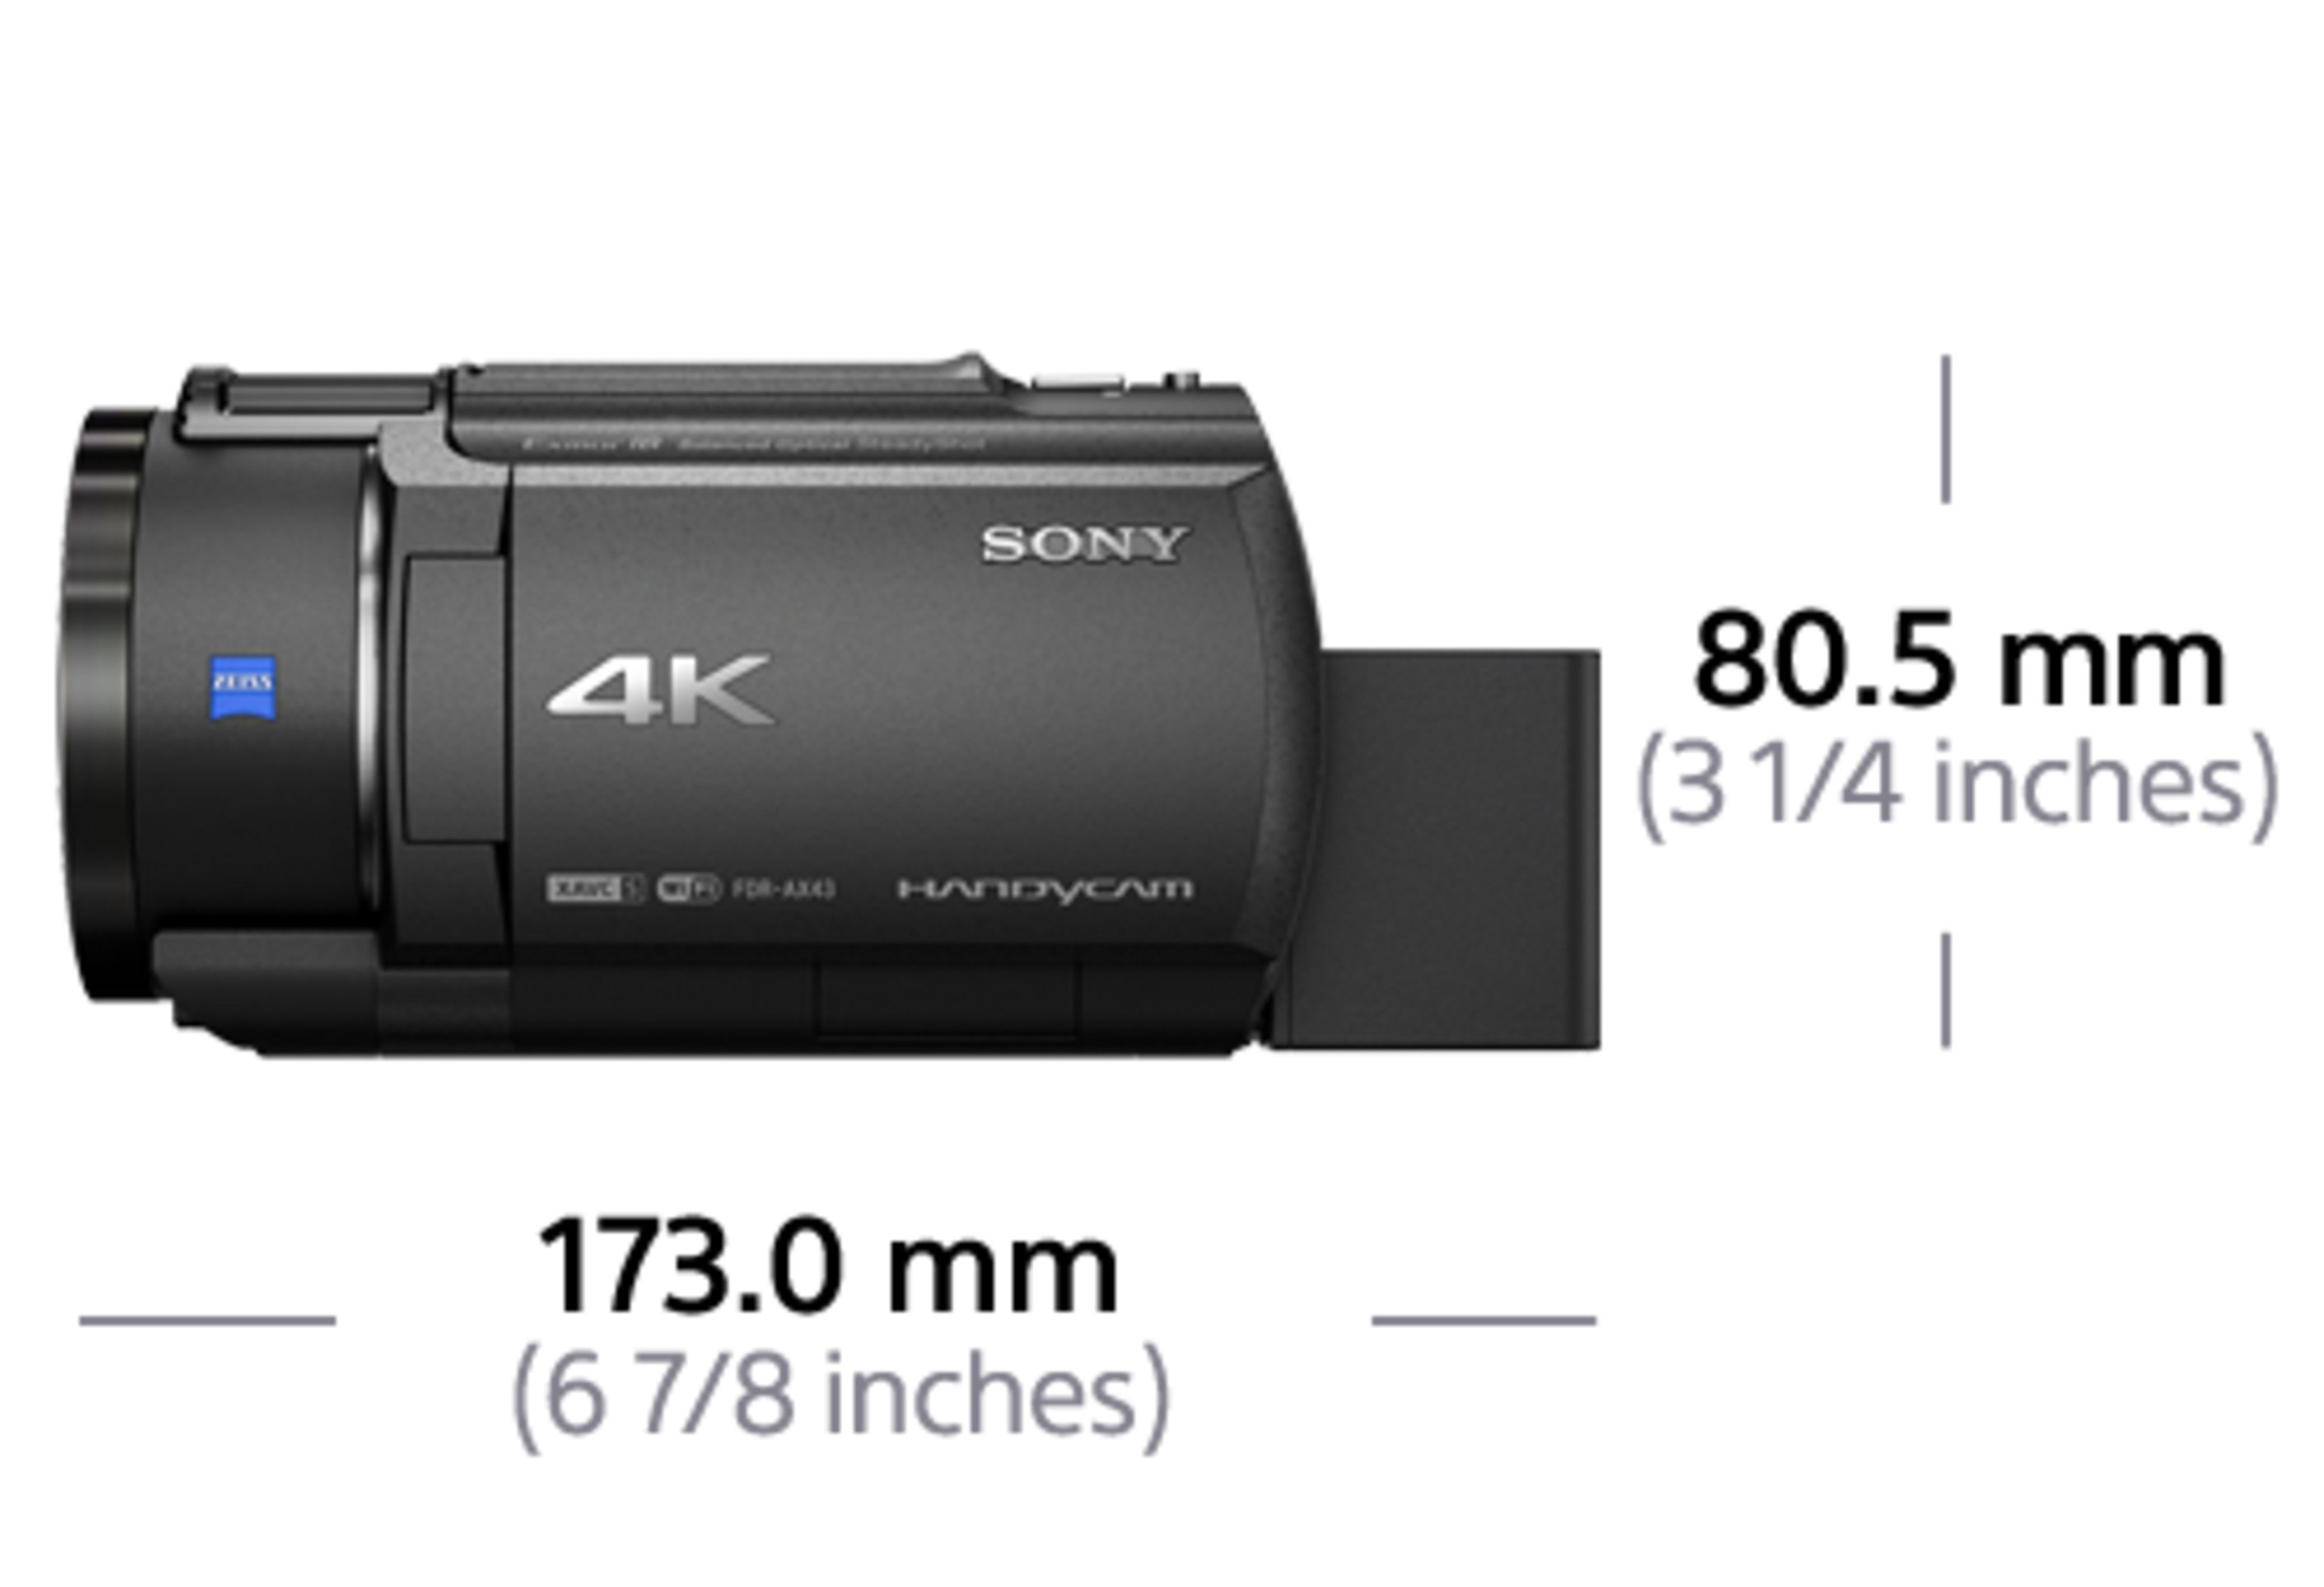 4K , FDR-AX 20xopt. 43 Zoom SONY Camcorder